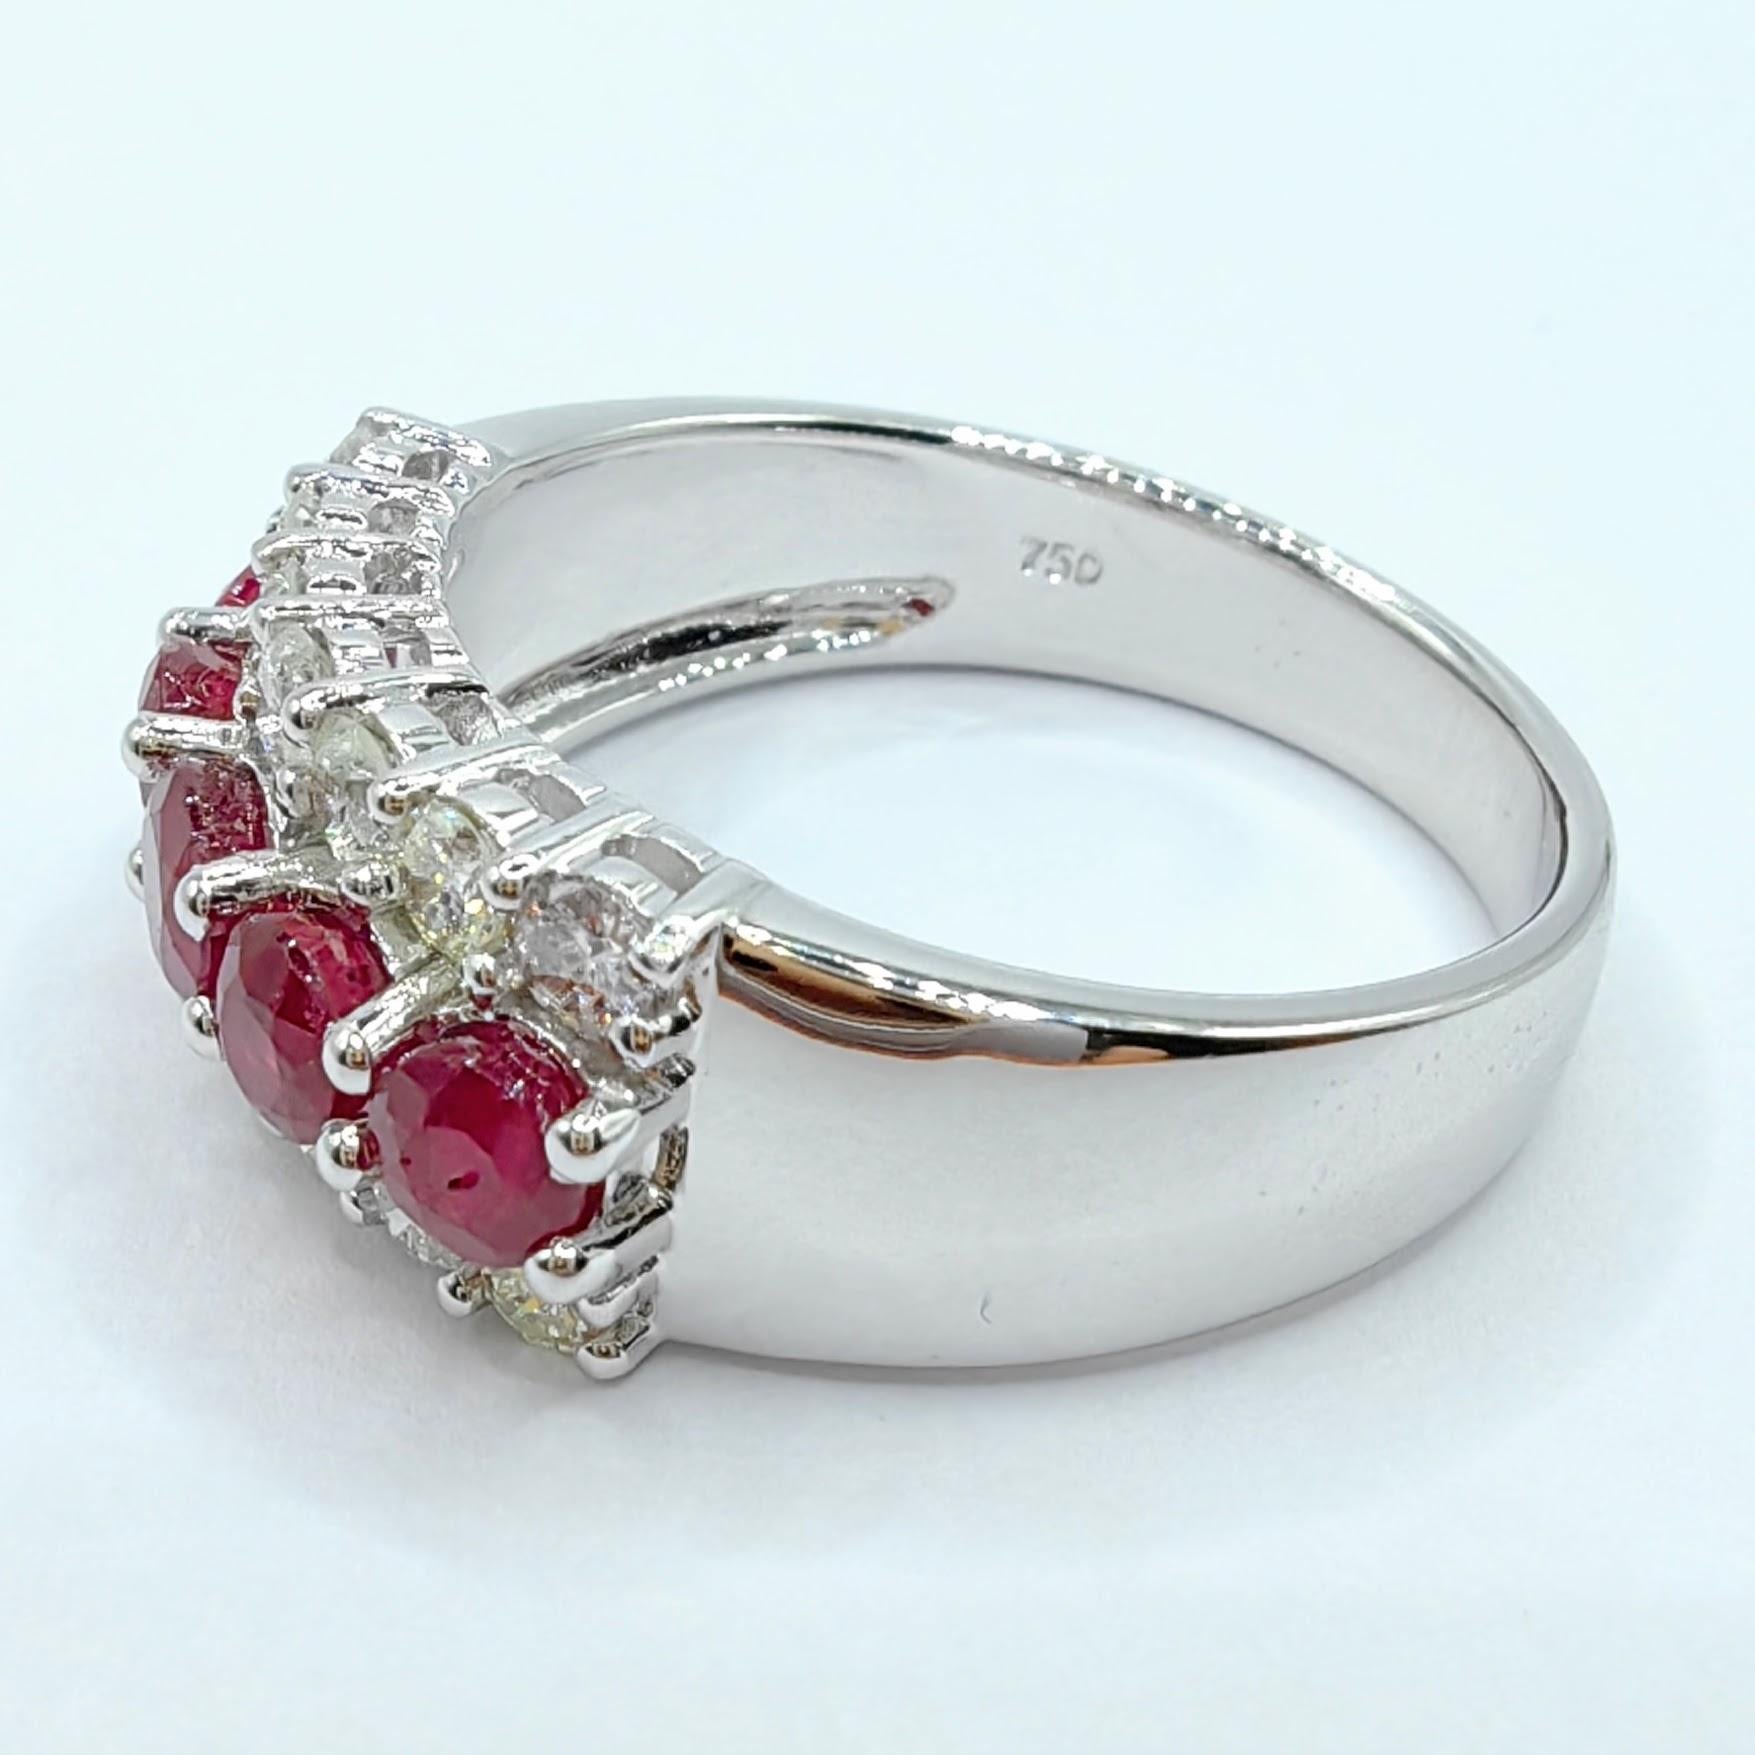 Contemporary 1.32 Carat Pigeon Blood Ruby & Diamond Half Eternity Ring in 18K White Gold For Sale